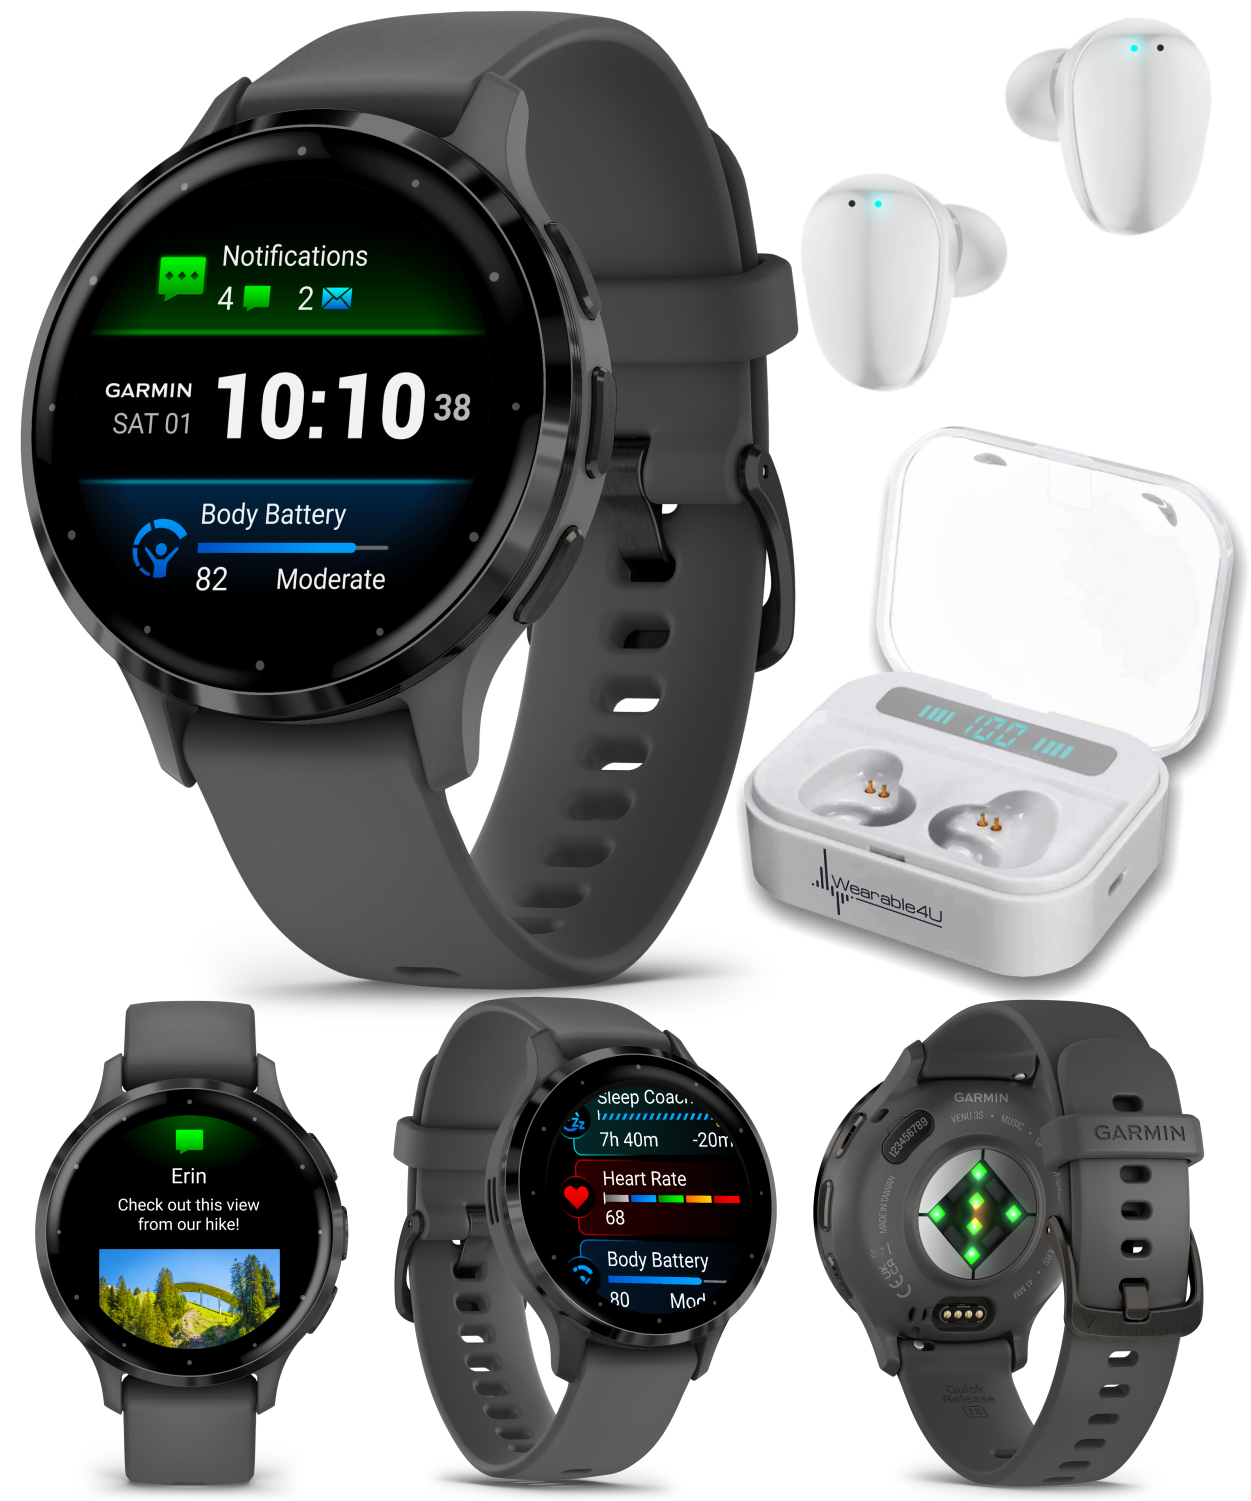 Garmin Venu 3 GPS Health & Fitness Smartwatch with AMOLED Touch Display